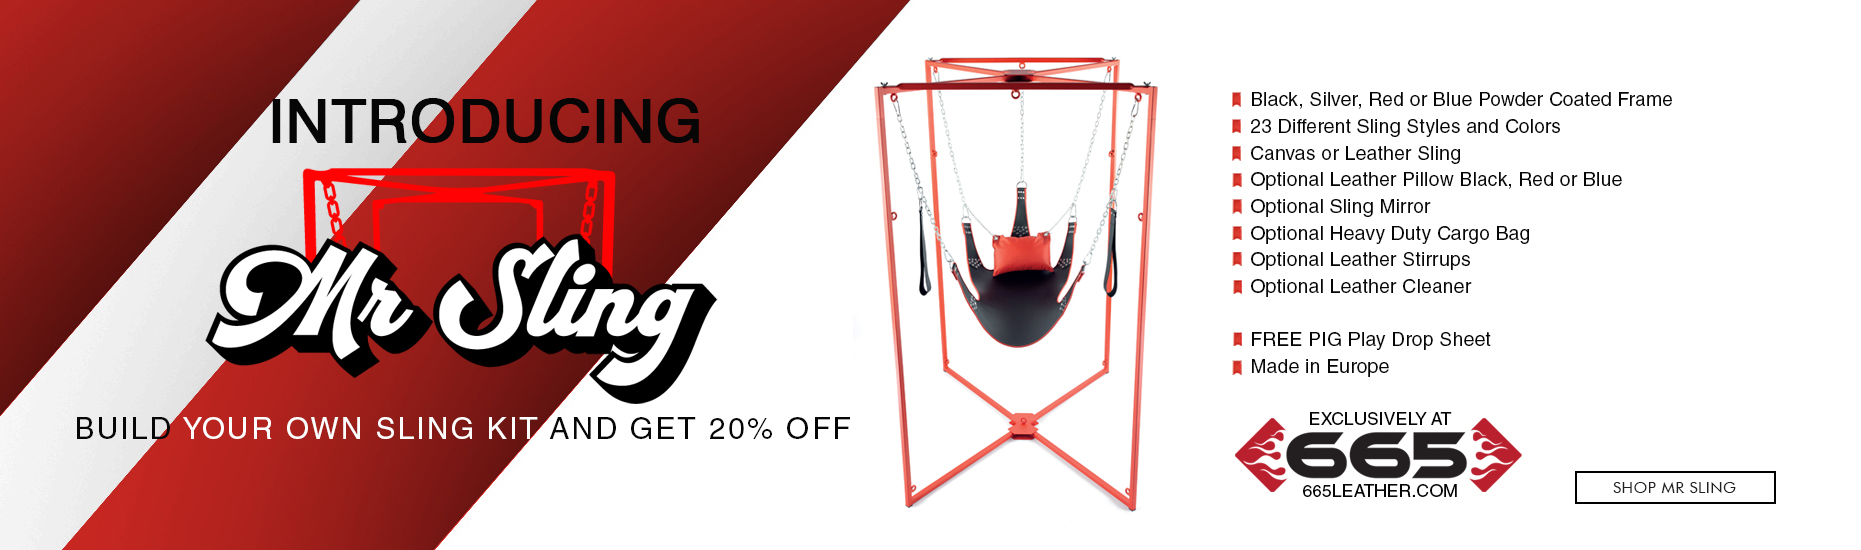 Introducing Mr Sling - Build Your Own Sling Kit and Get 20% Off